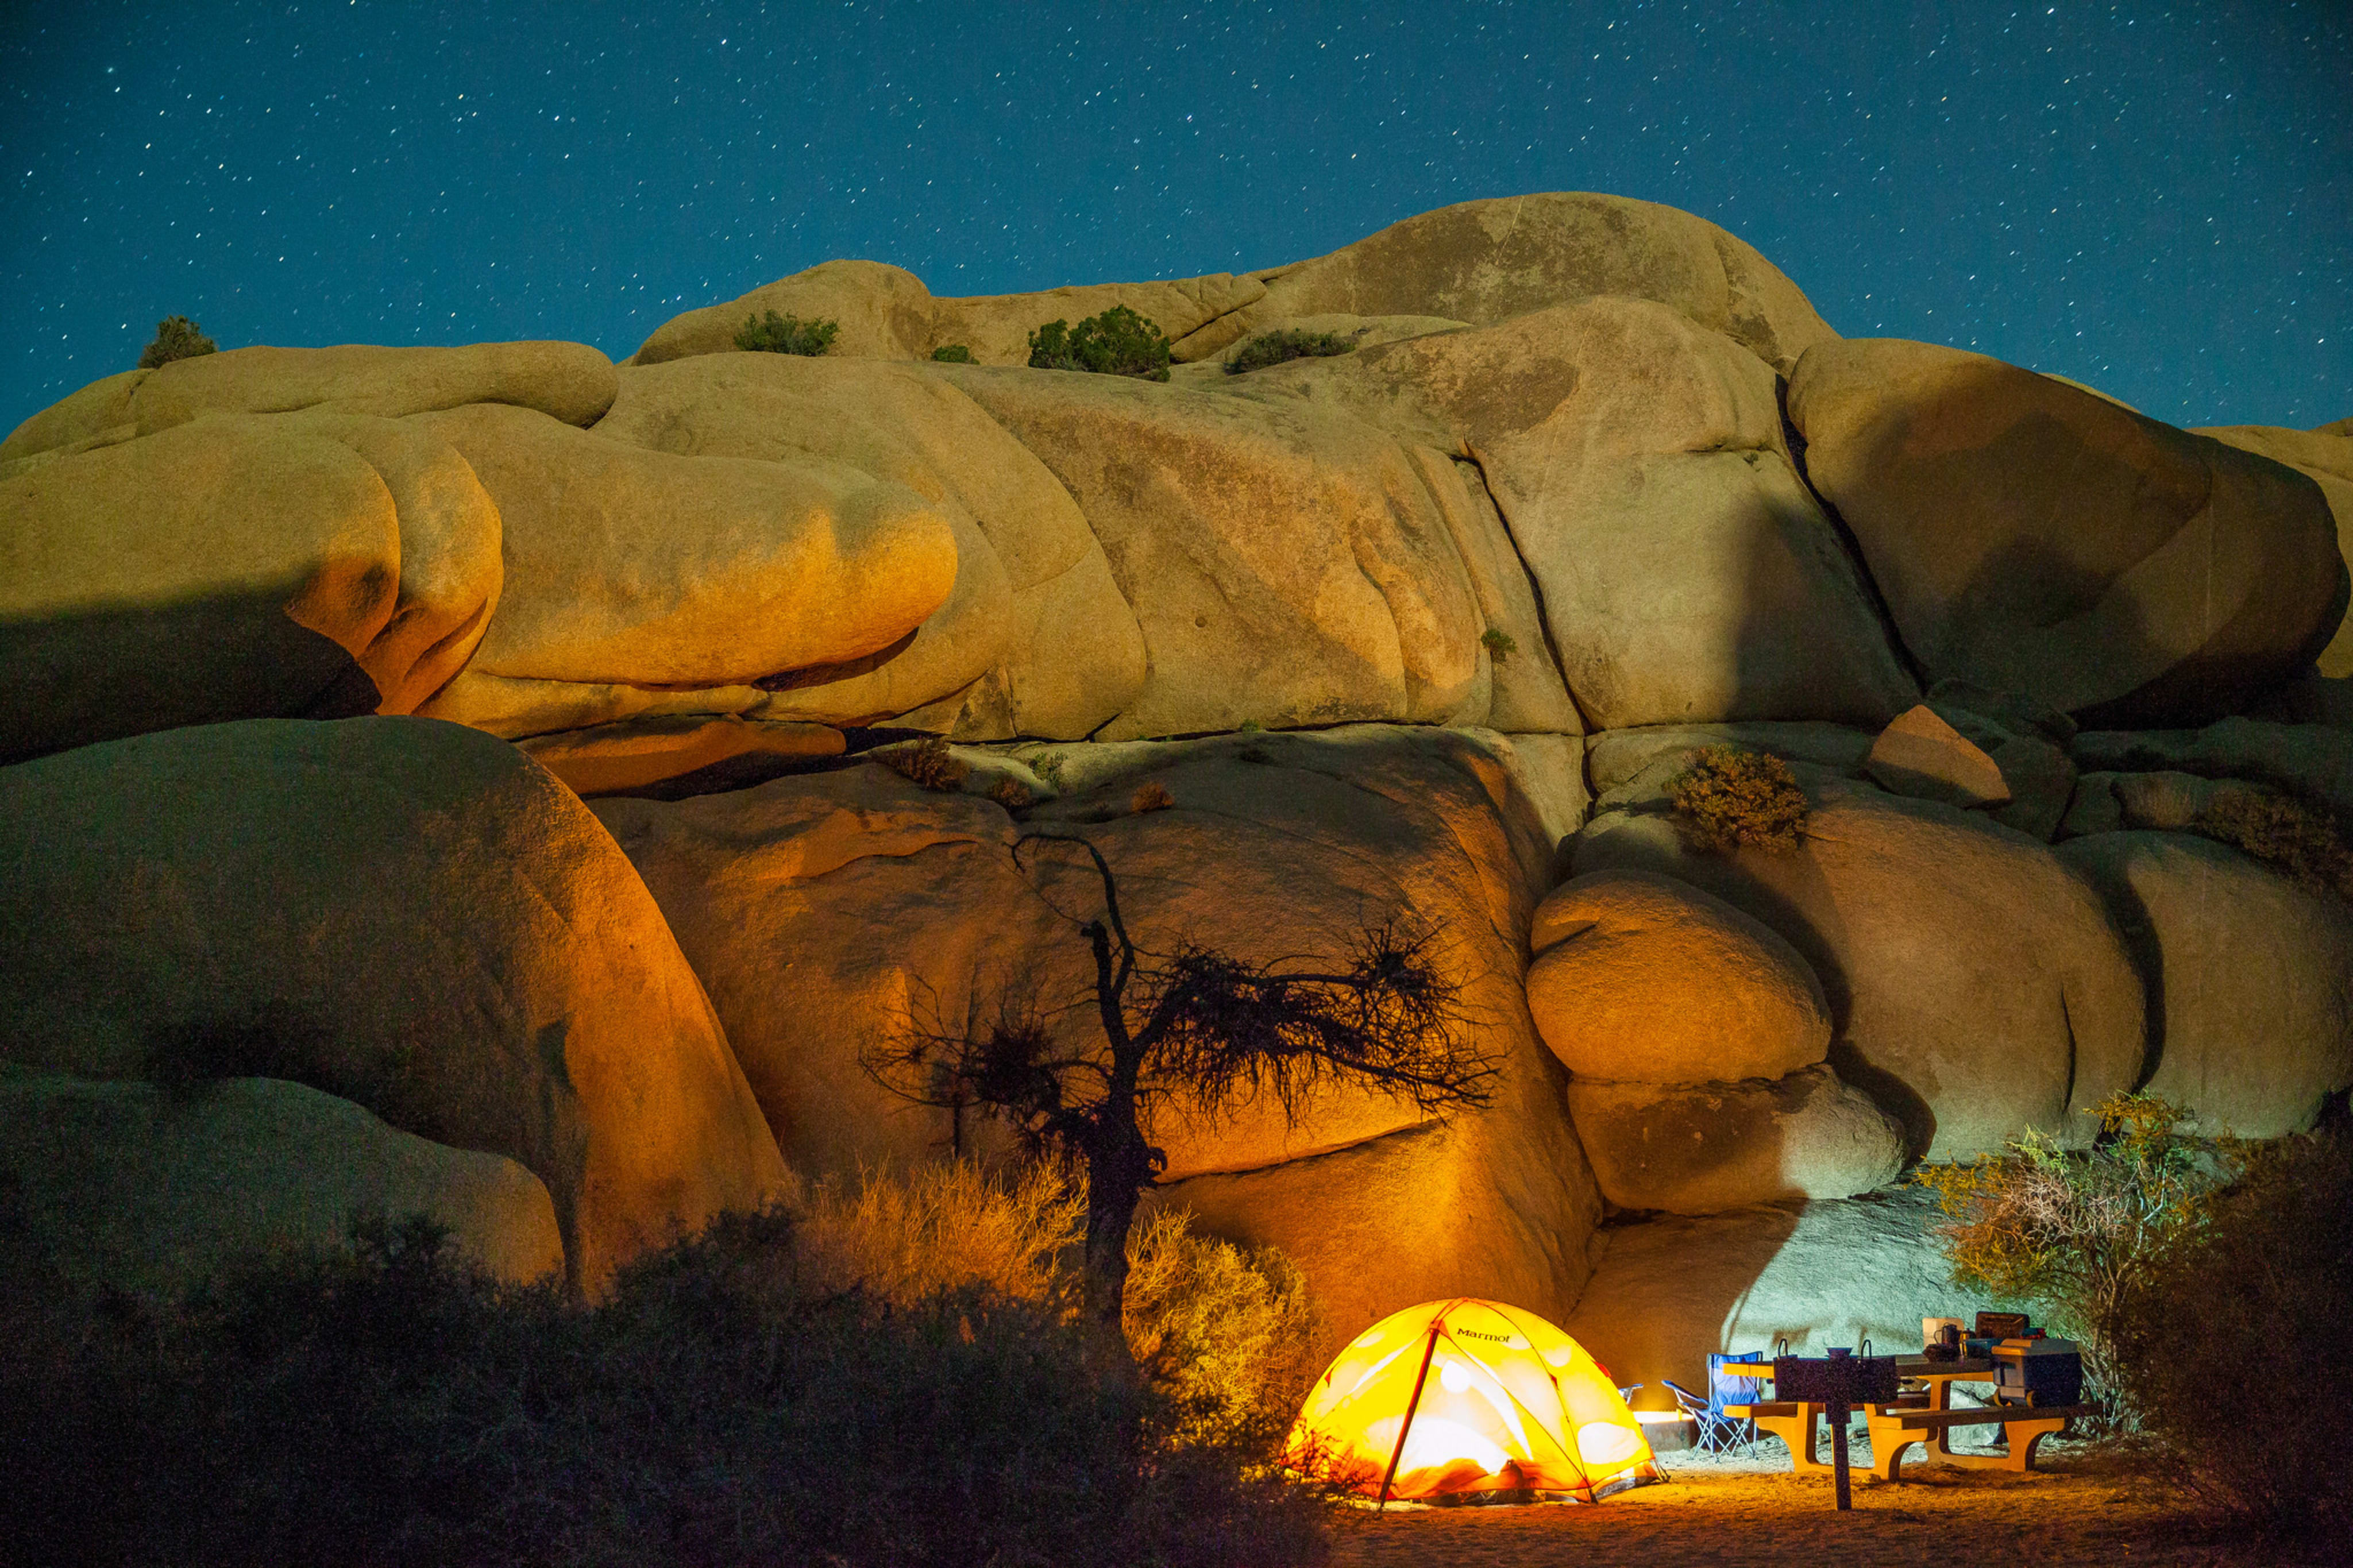 Joshua Tree is incredible to enter at night